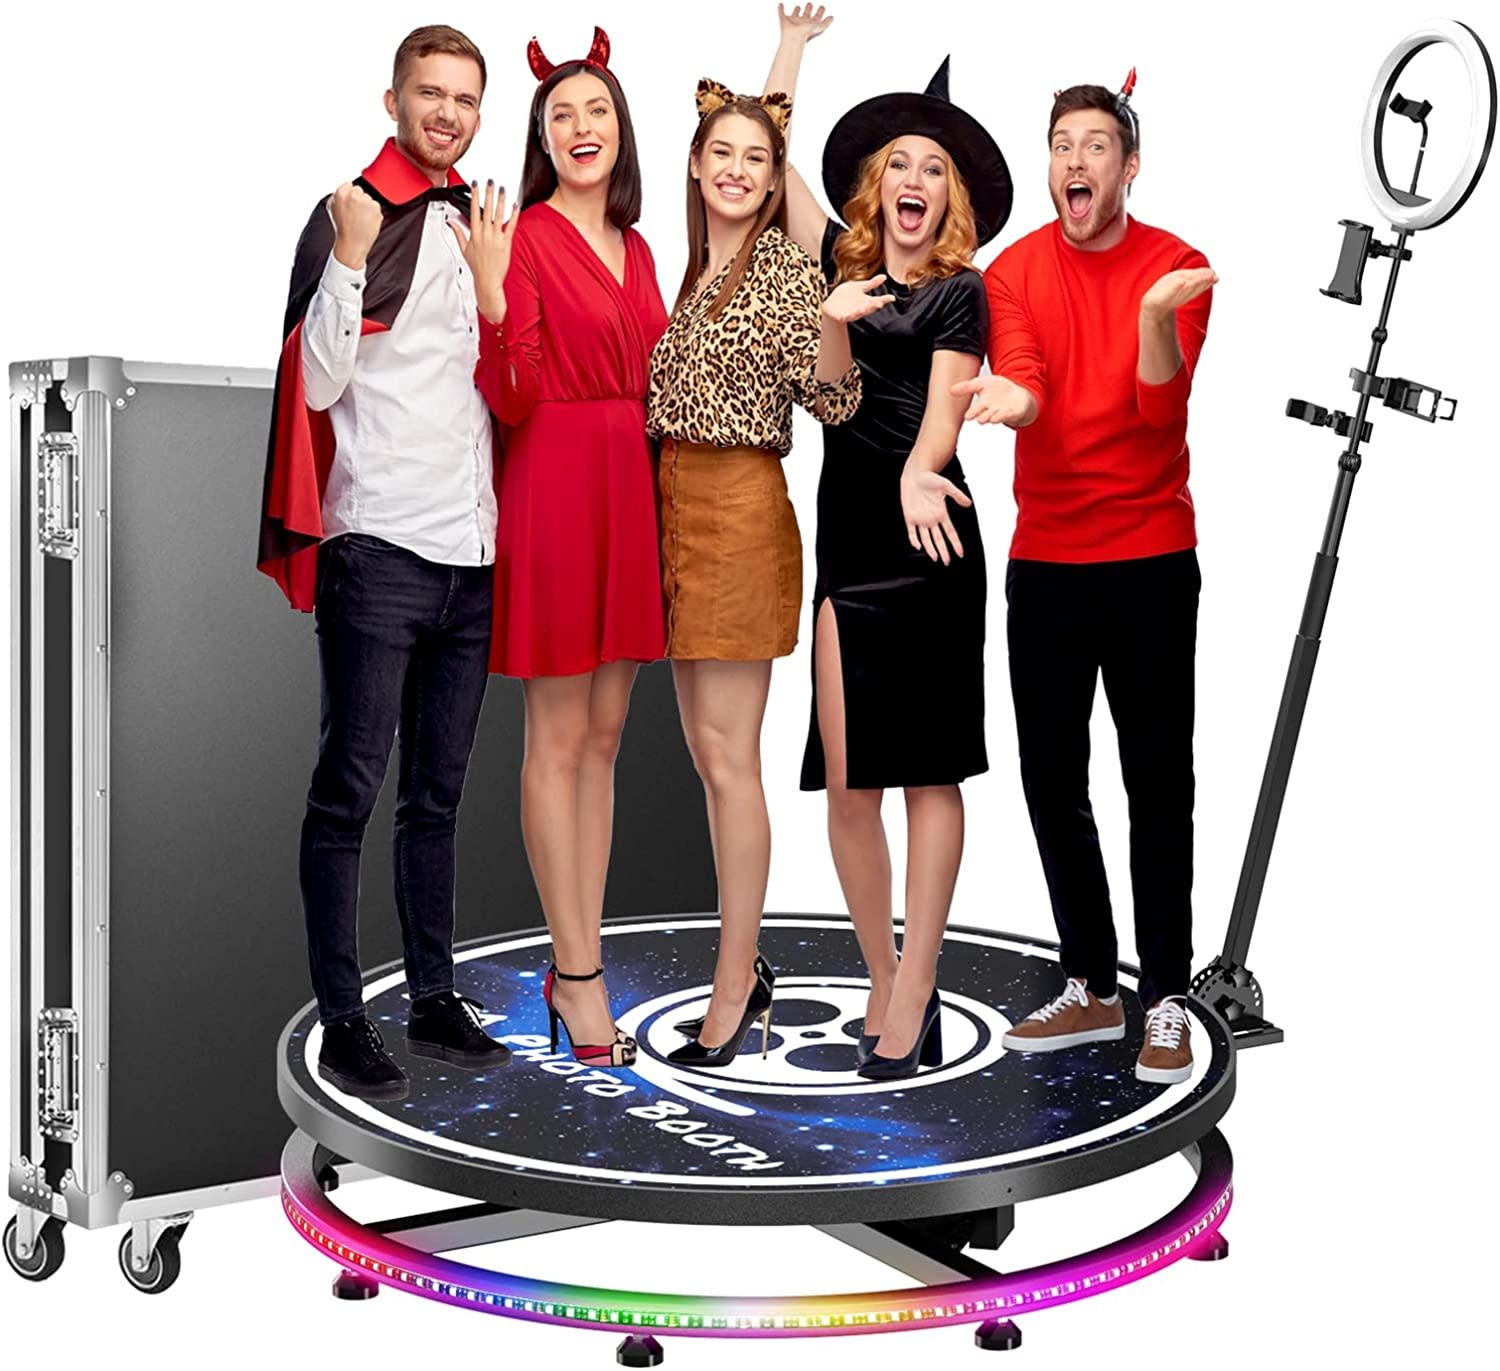 360 Photo Booth Machine For Parties 100cm With Ring Light,Stand On Remote  Control Automatic Slow Motion 360 Spin Photo Camera Booth 2-3 People, 360